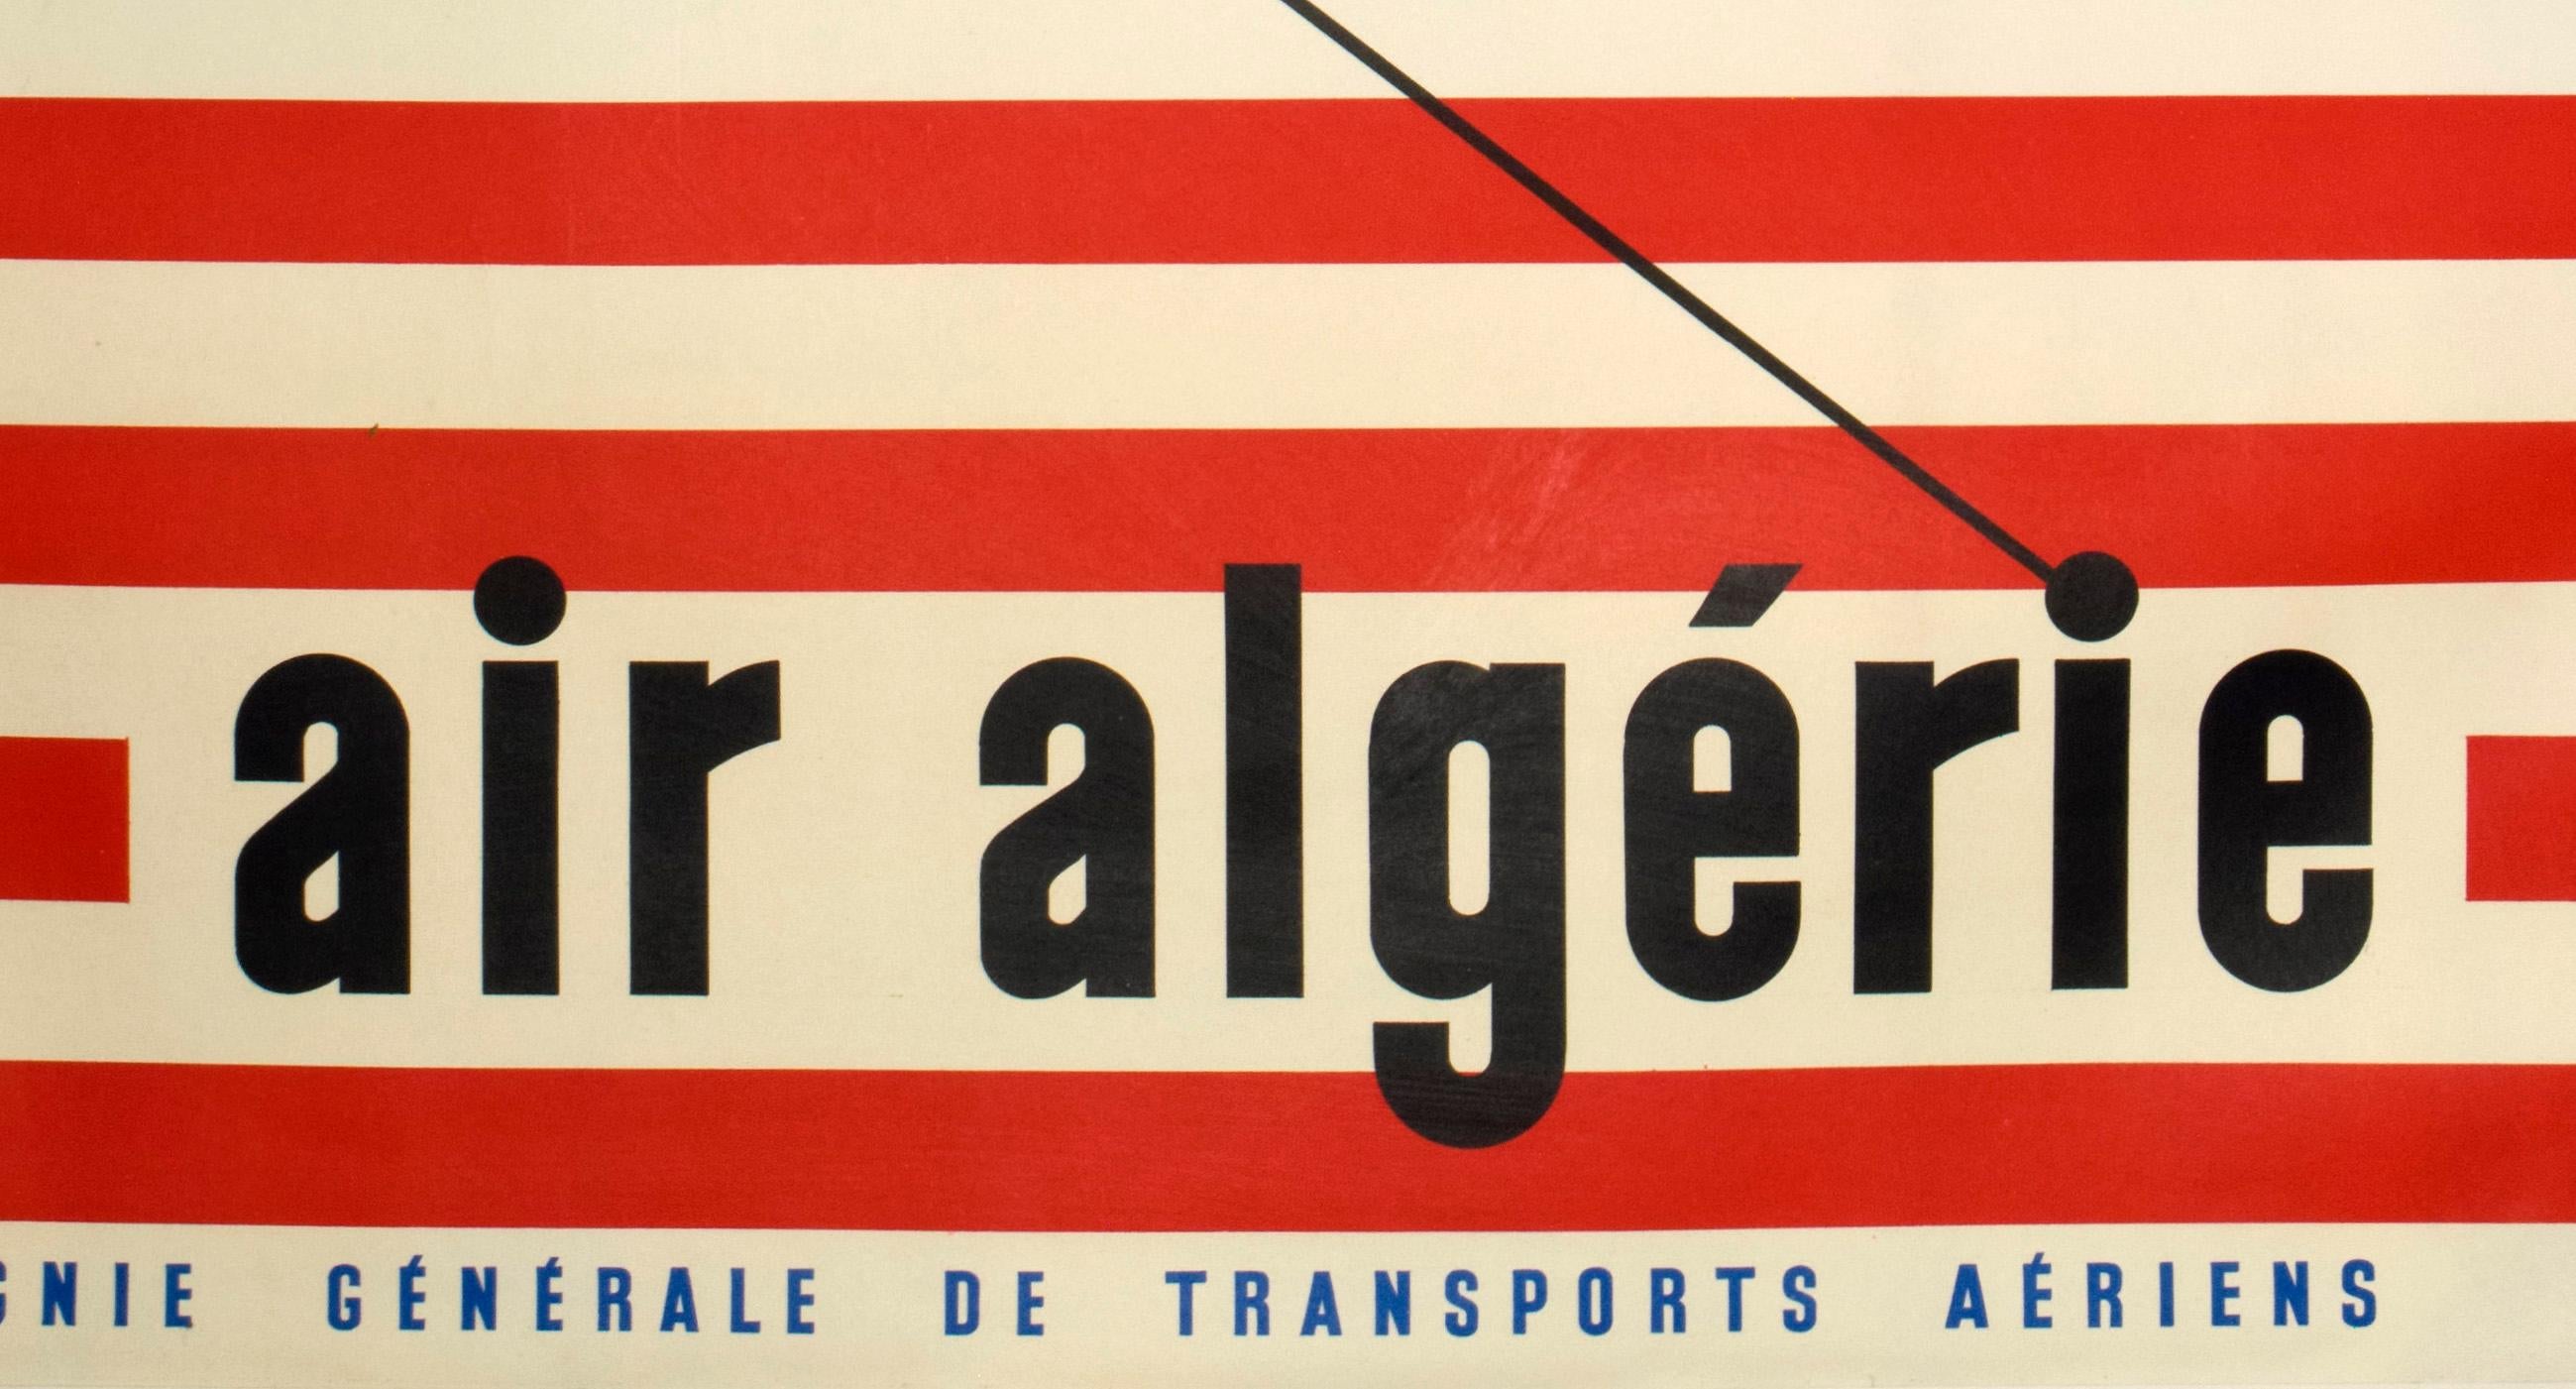 In this clean, 1950s atomic-age design for Air Algerie, Guy Georget features the sleek Lockheed Constellation with its distinctive triple-tail and thin, dolphin-shaped body. The posters palette of blue, red and white, are those of the French